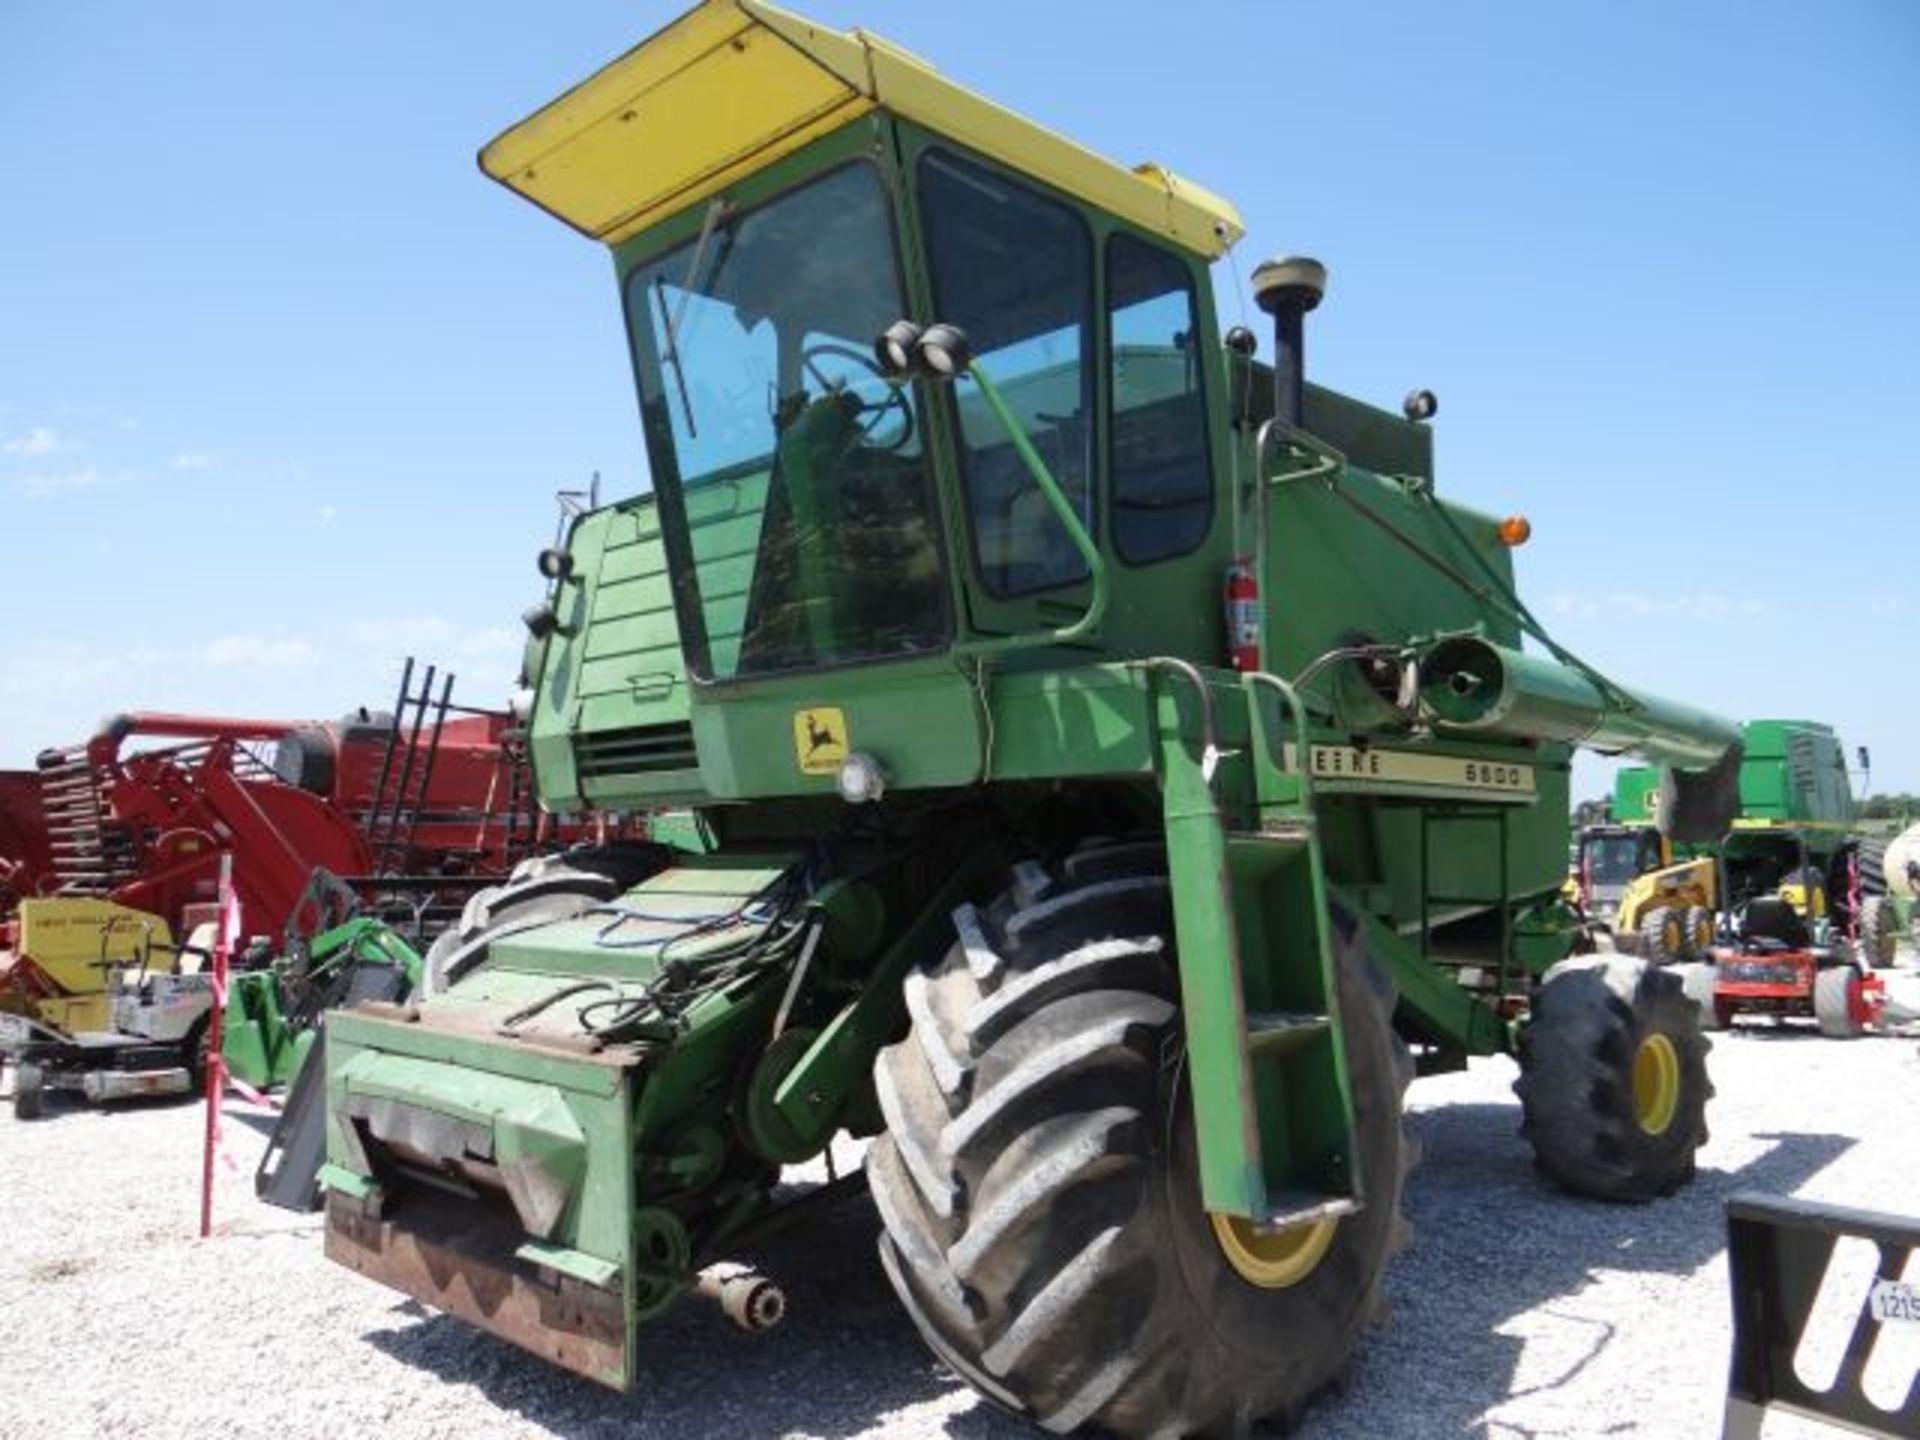 JD 6600 Combine, 1974 5500 hrs, Used in 2015, AC Works Good, New Cylinder Bars in 2012, Feeder House